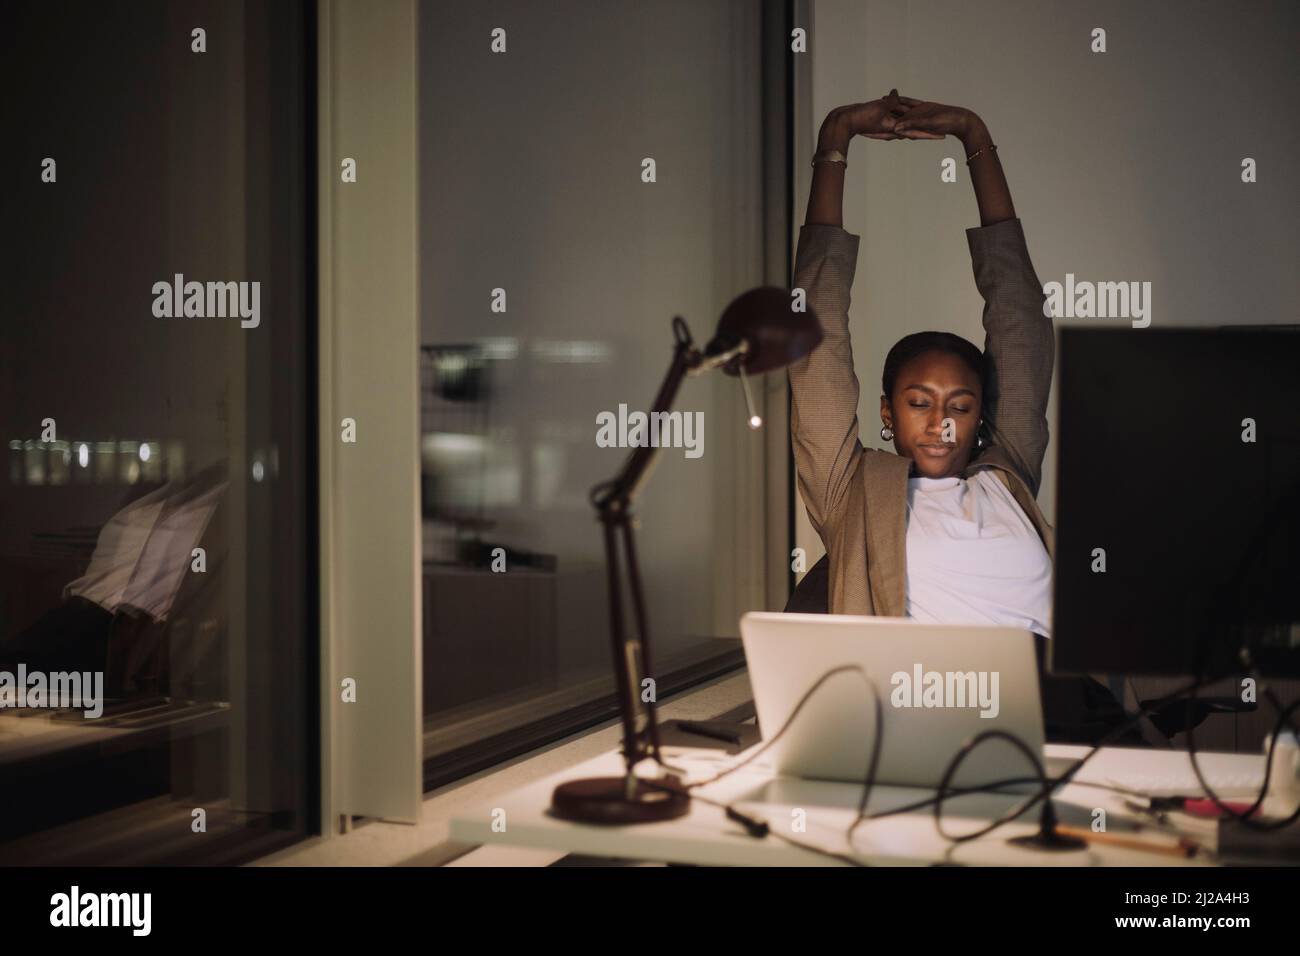 Tired businesswoman stretching hands while working in office at night Stock Photo